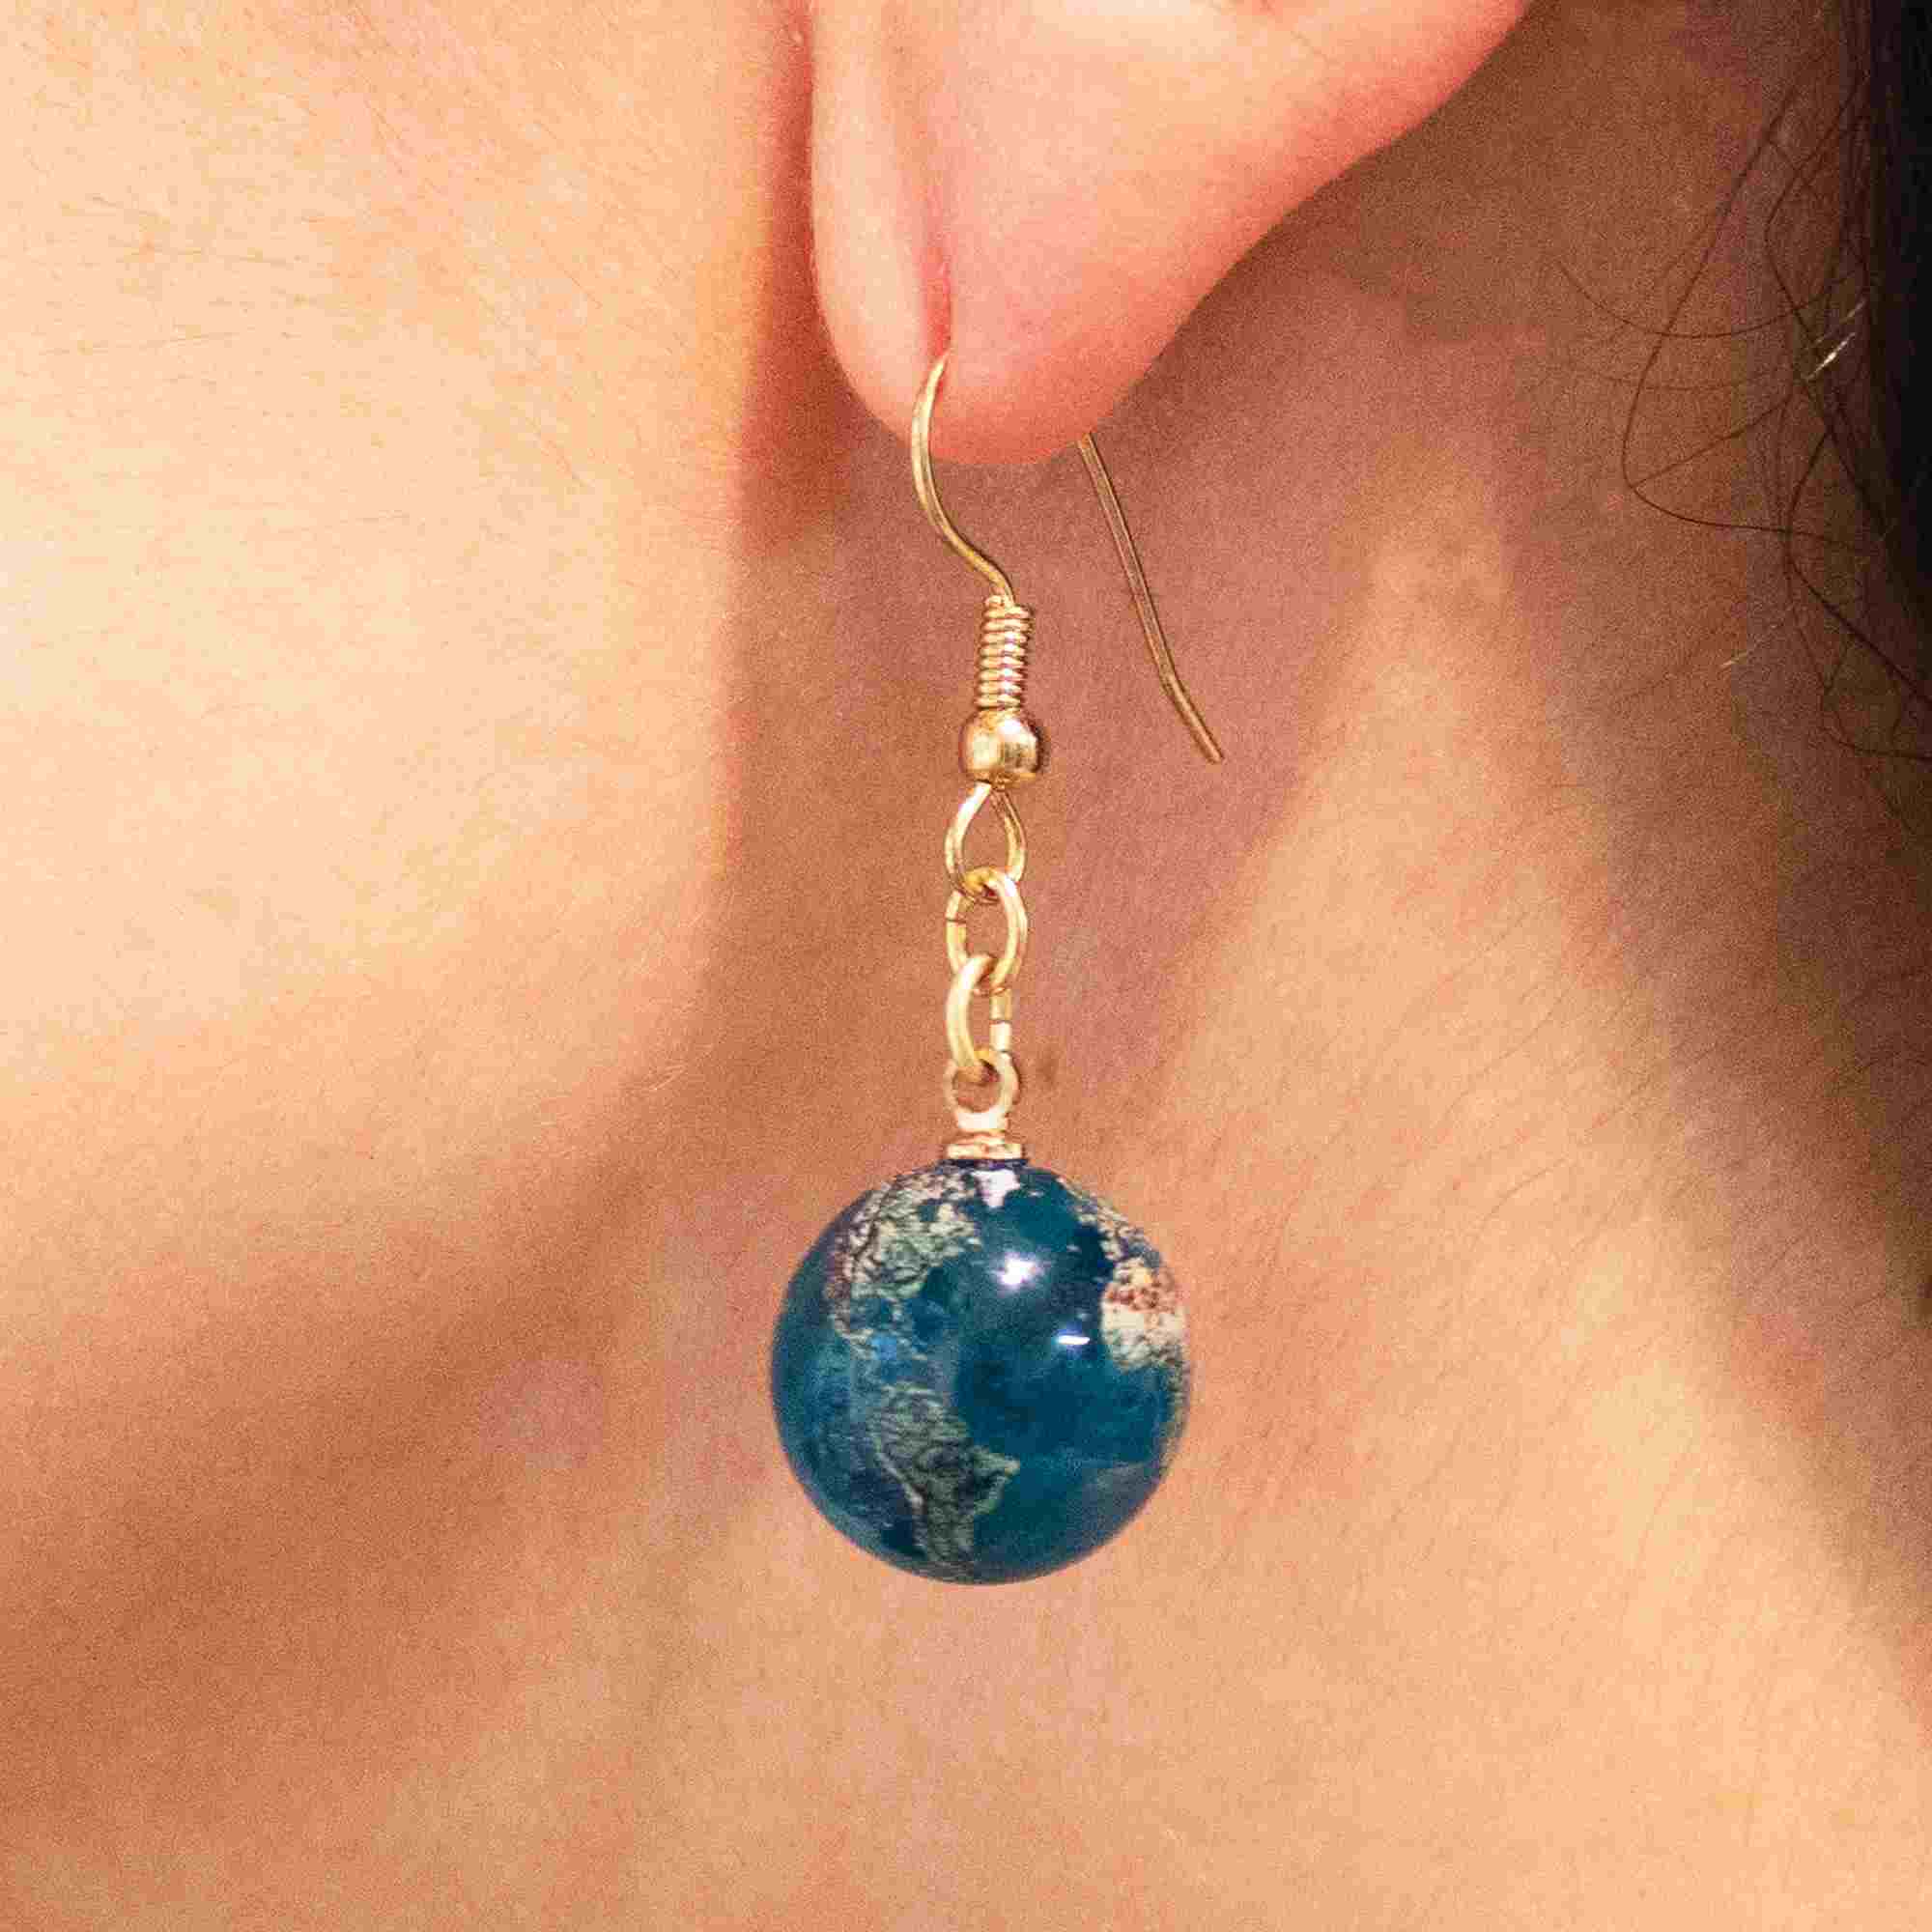 Natural earth earrings woman side view